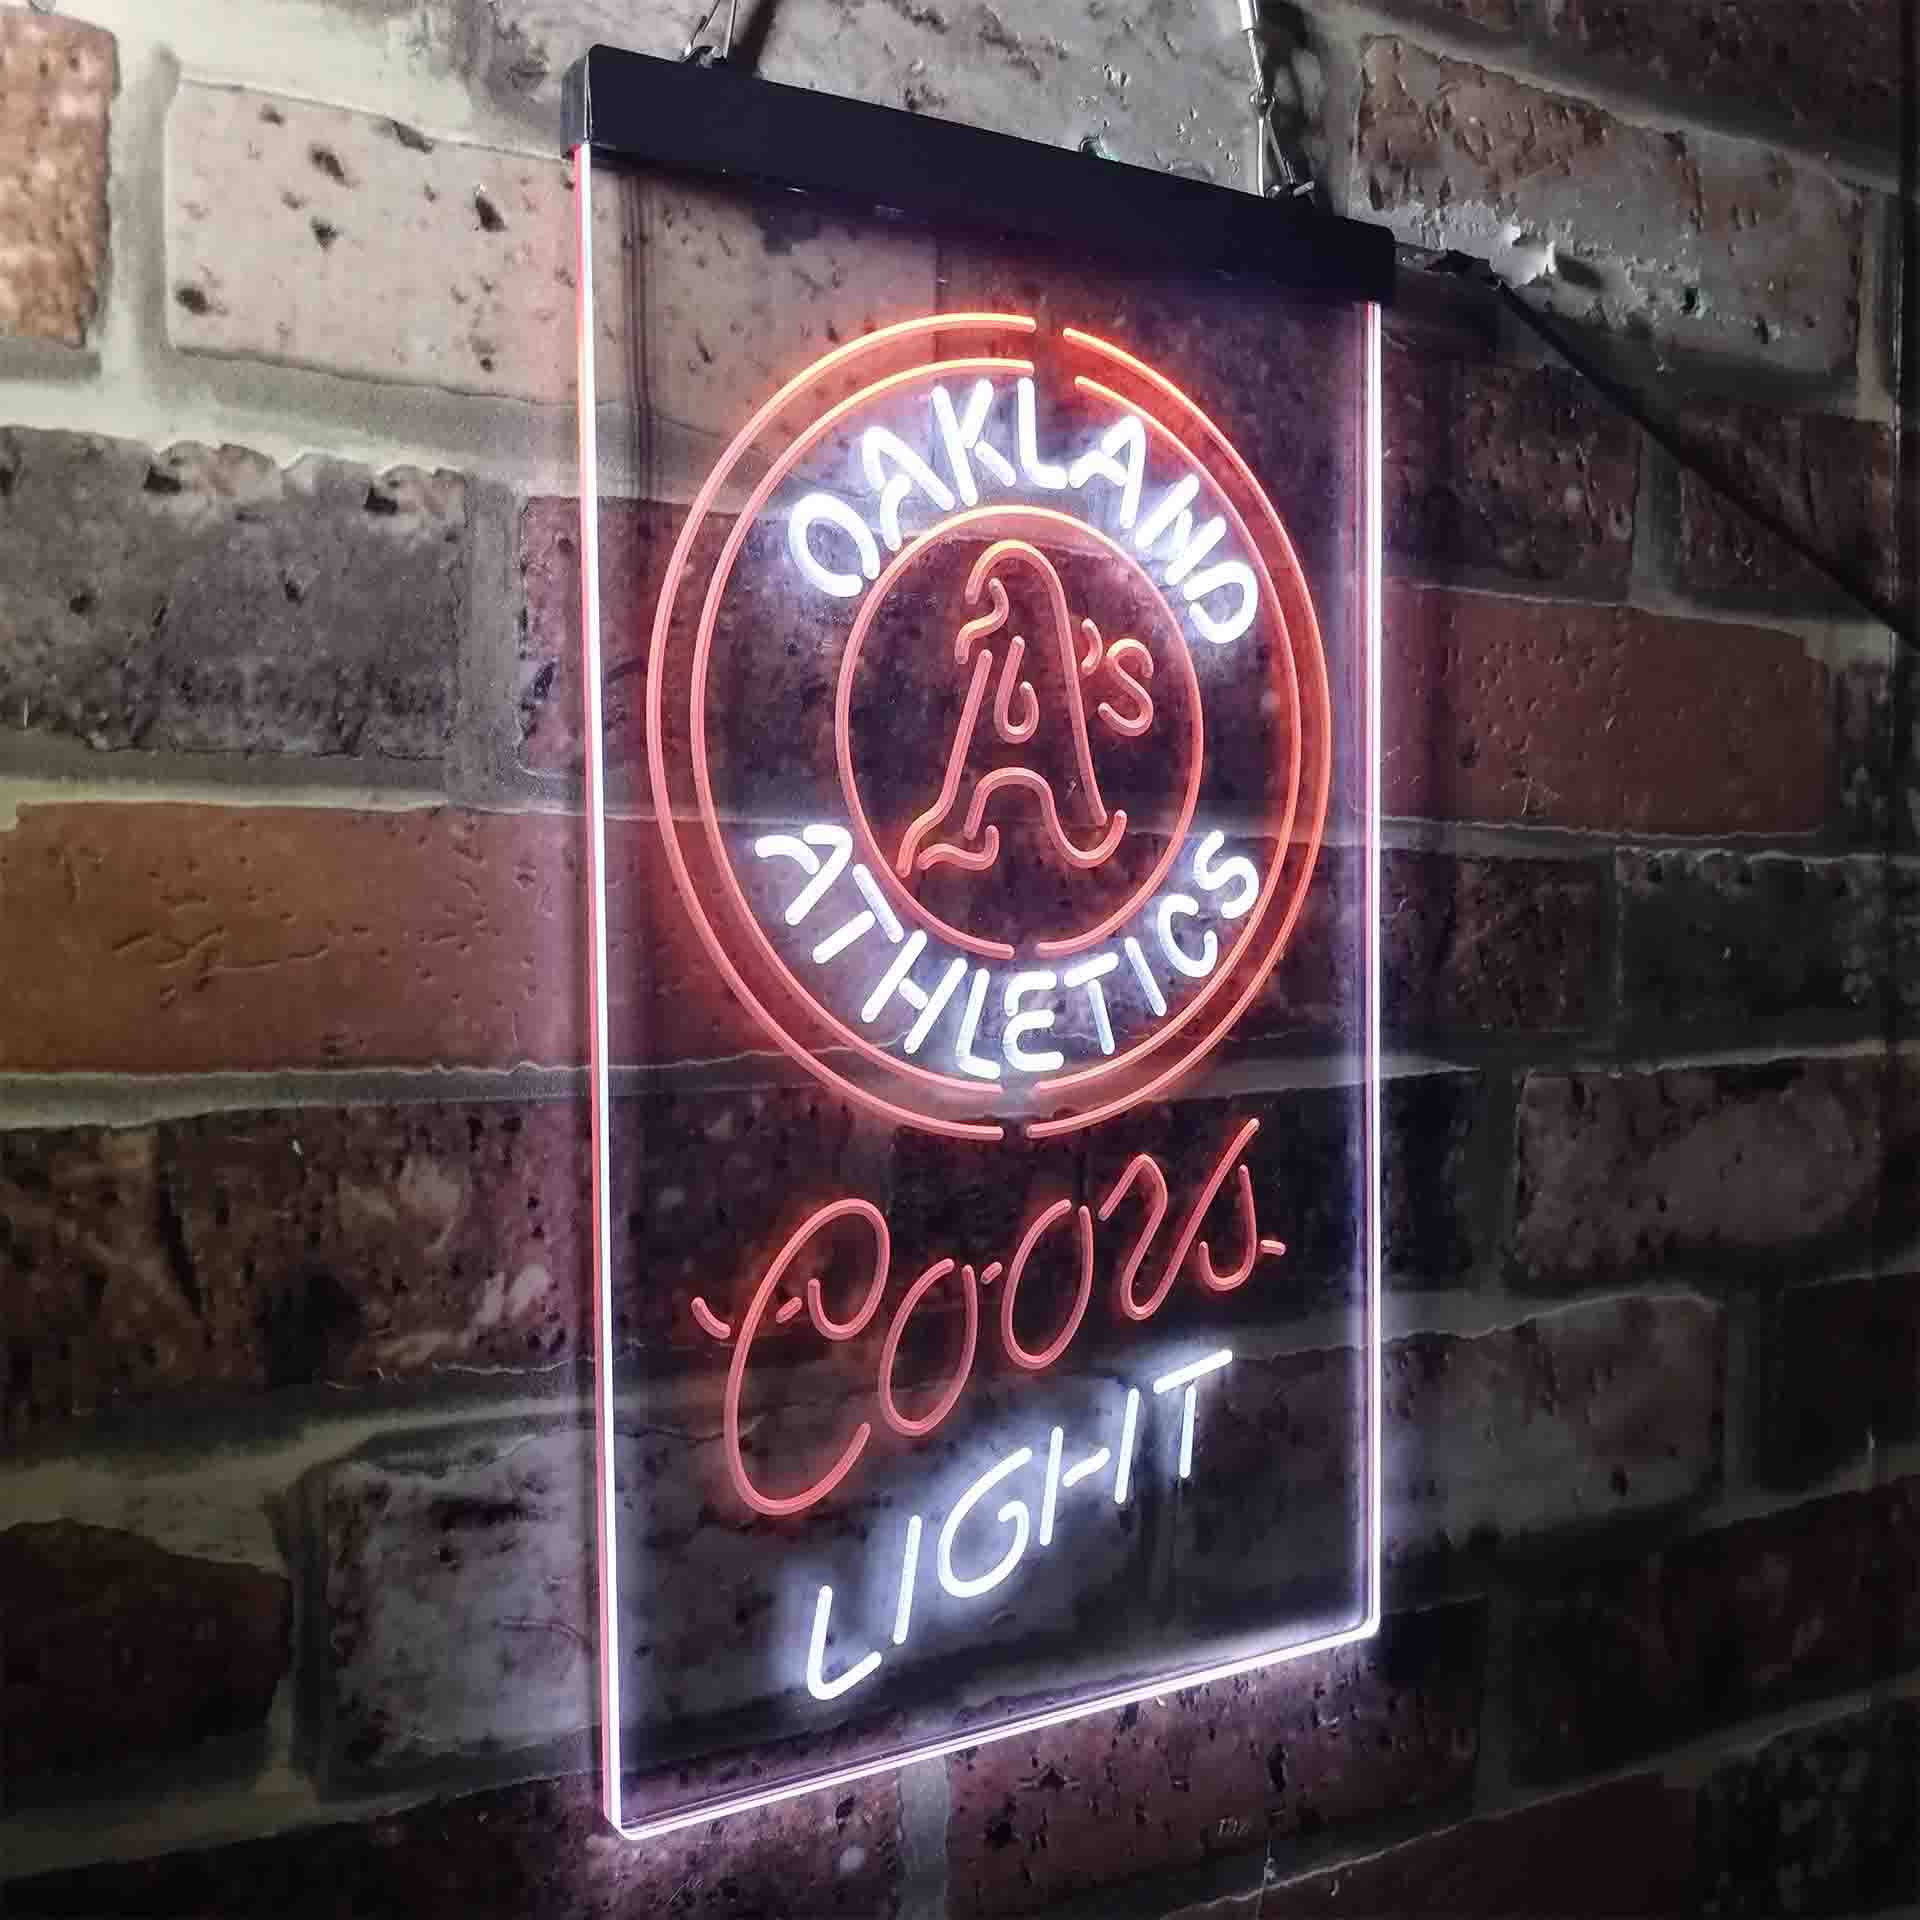 Oakland Athletics Coors Light LED Neon Sign